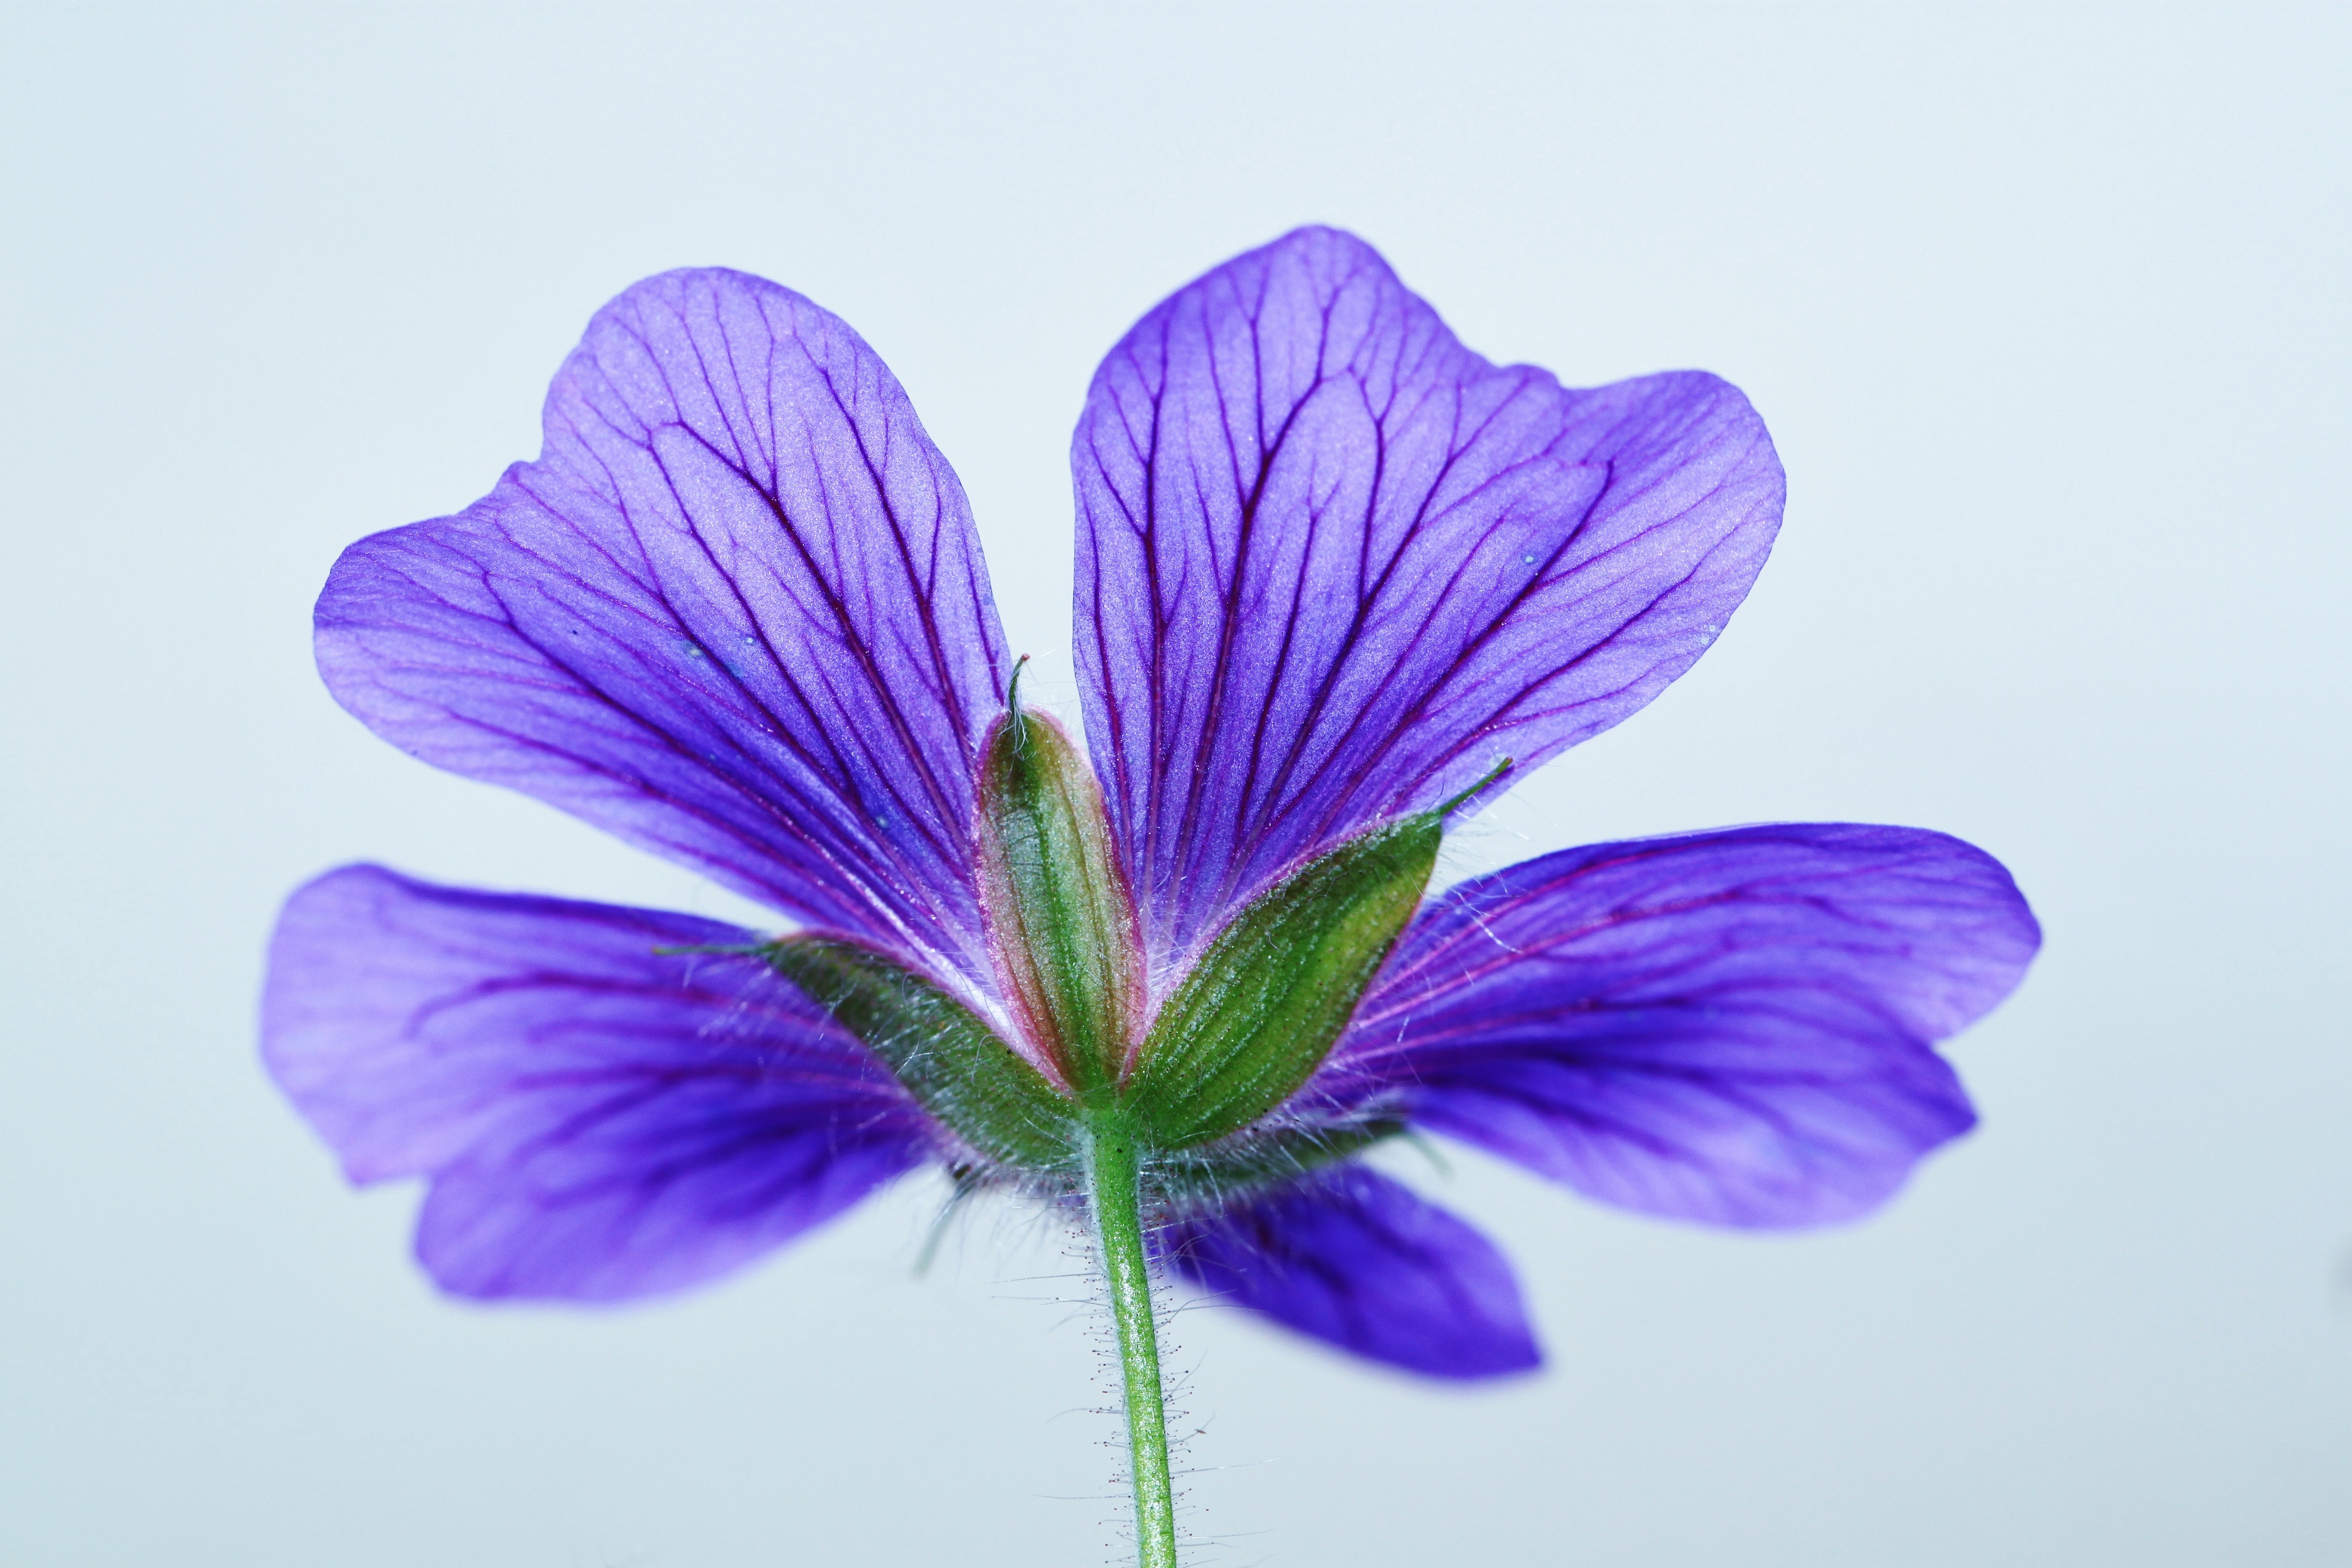 purple petaled flower in close up photo